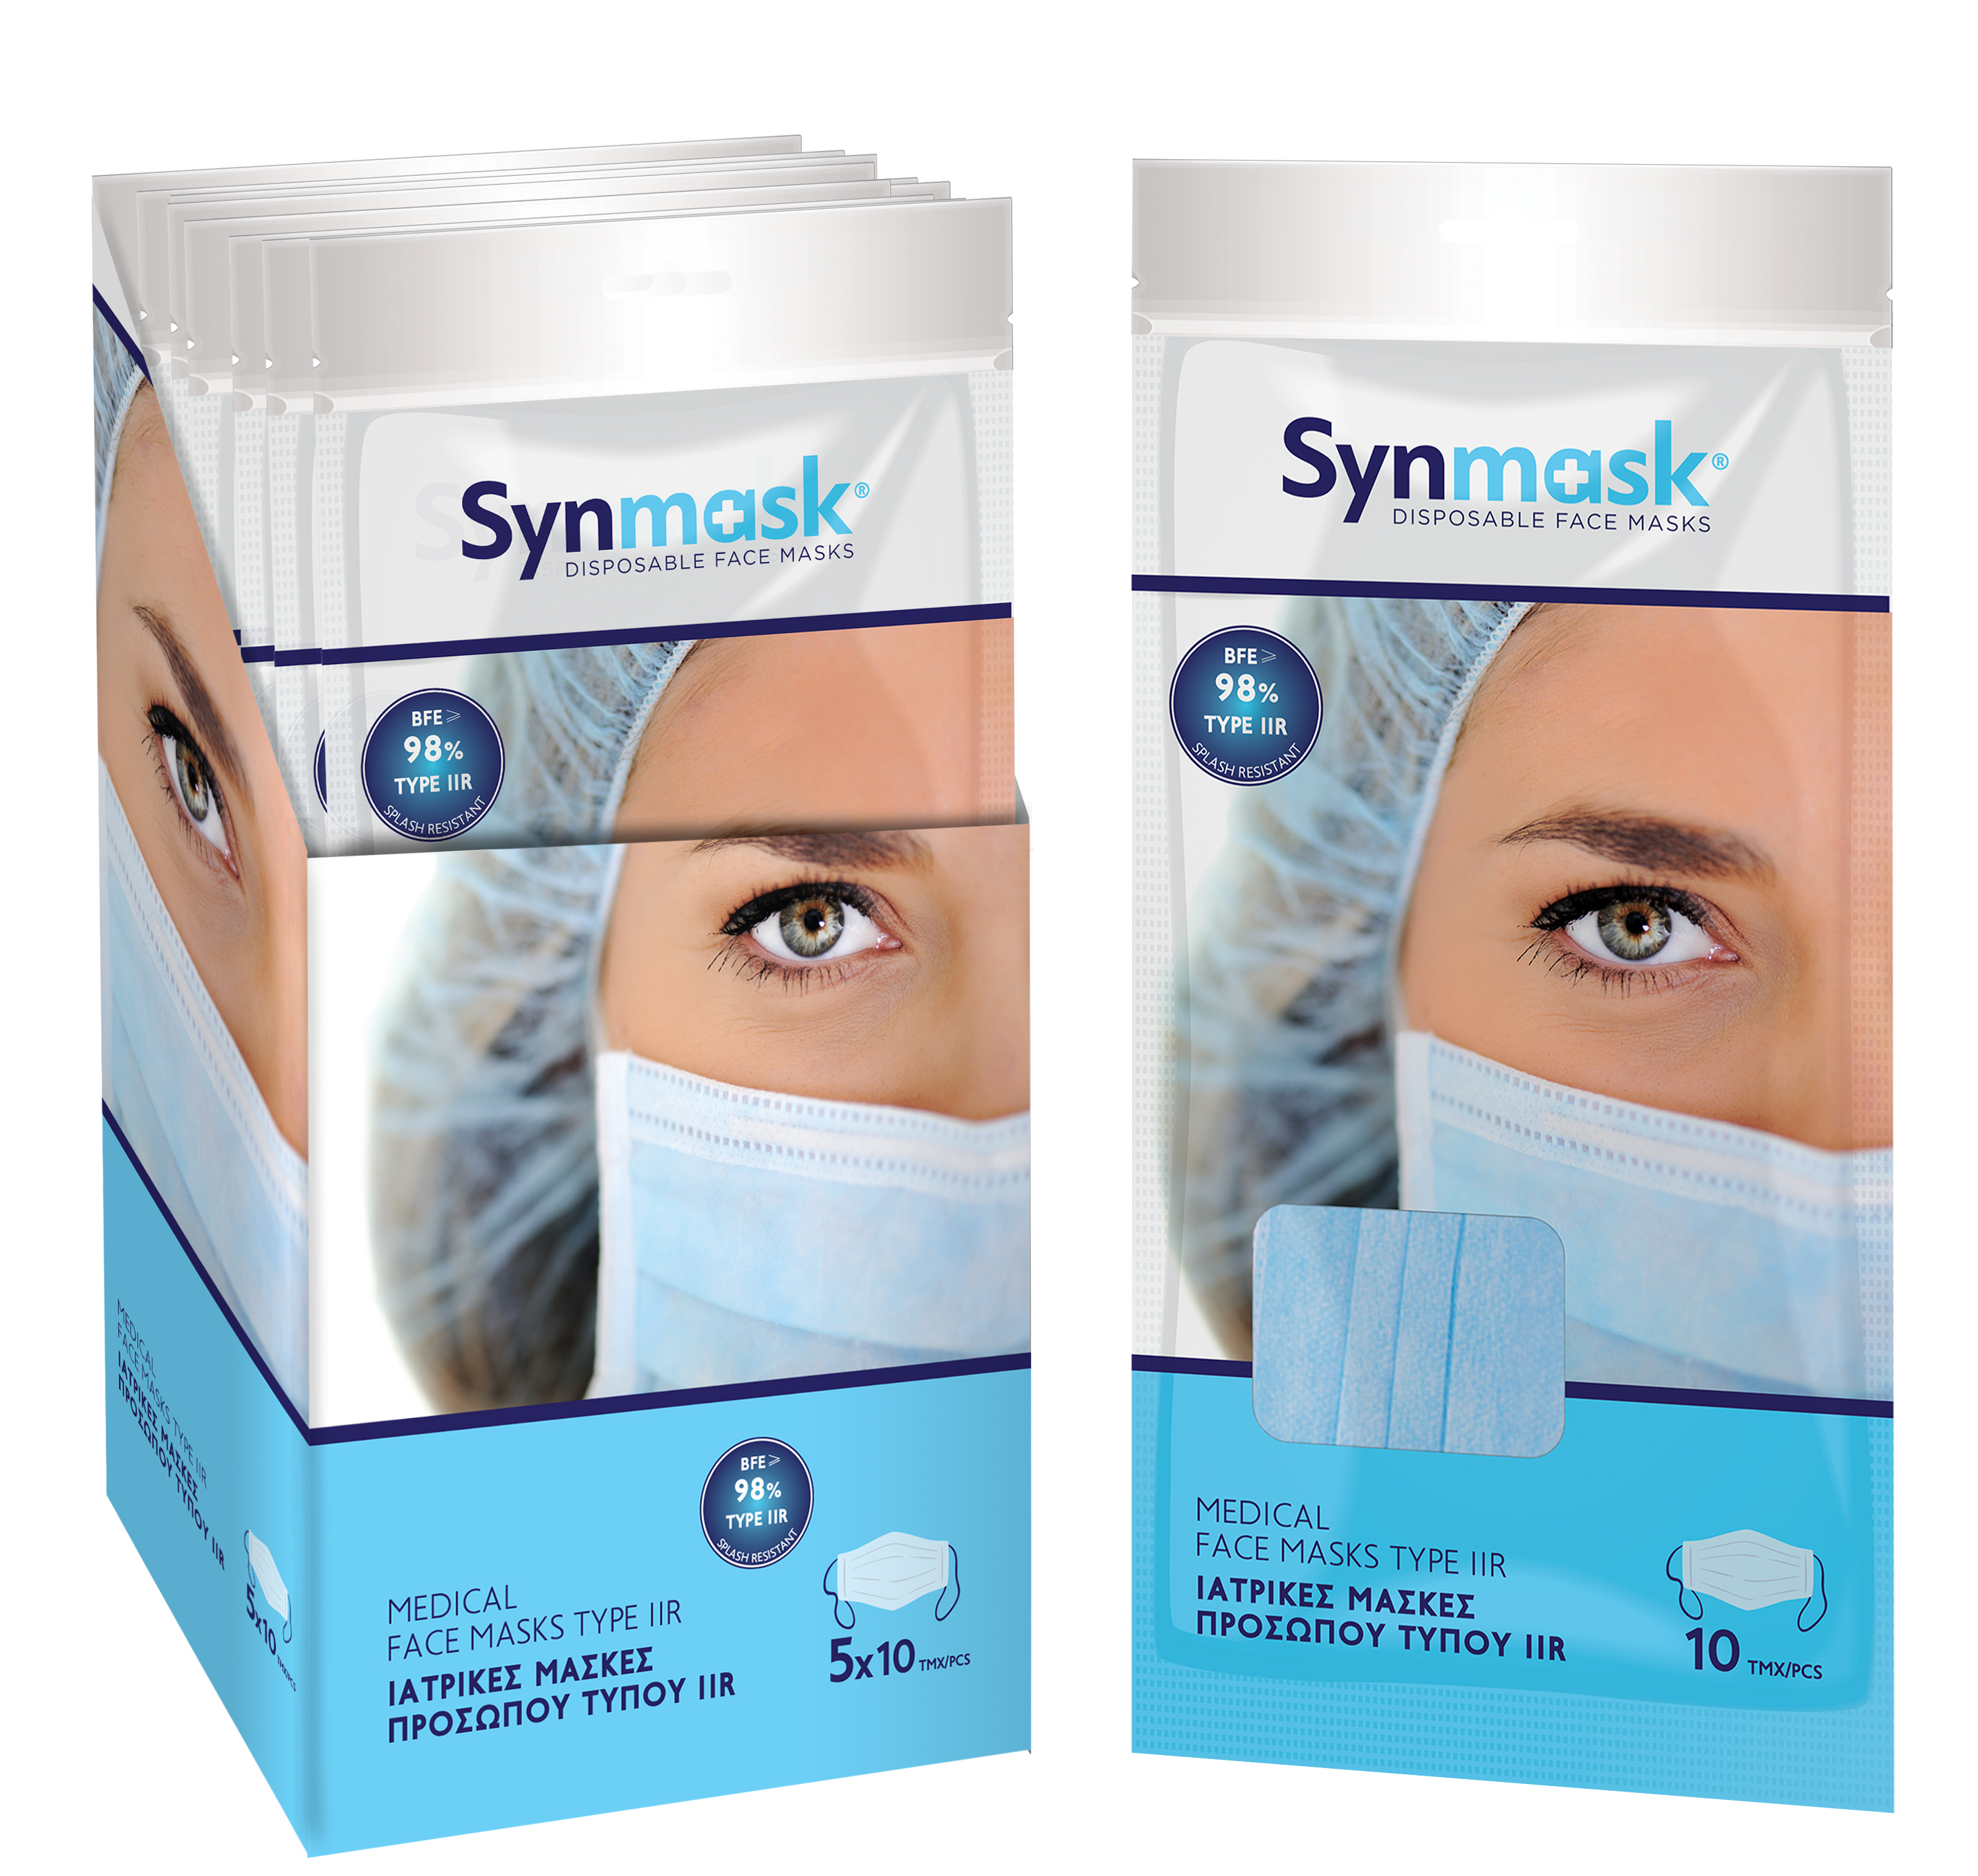 Surgical Masks Synmask 3ply Type IIR BFE>98% Display Box 5x10pcs